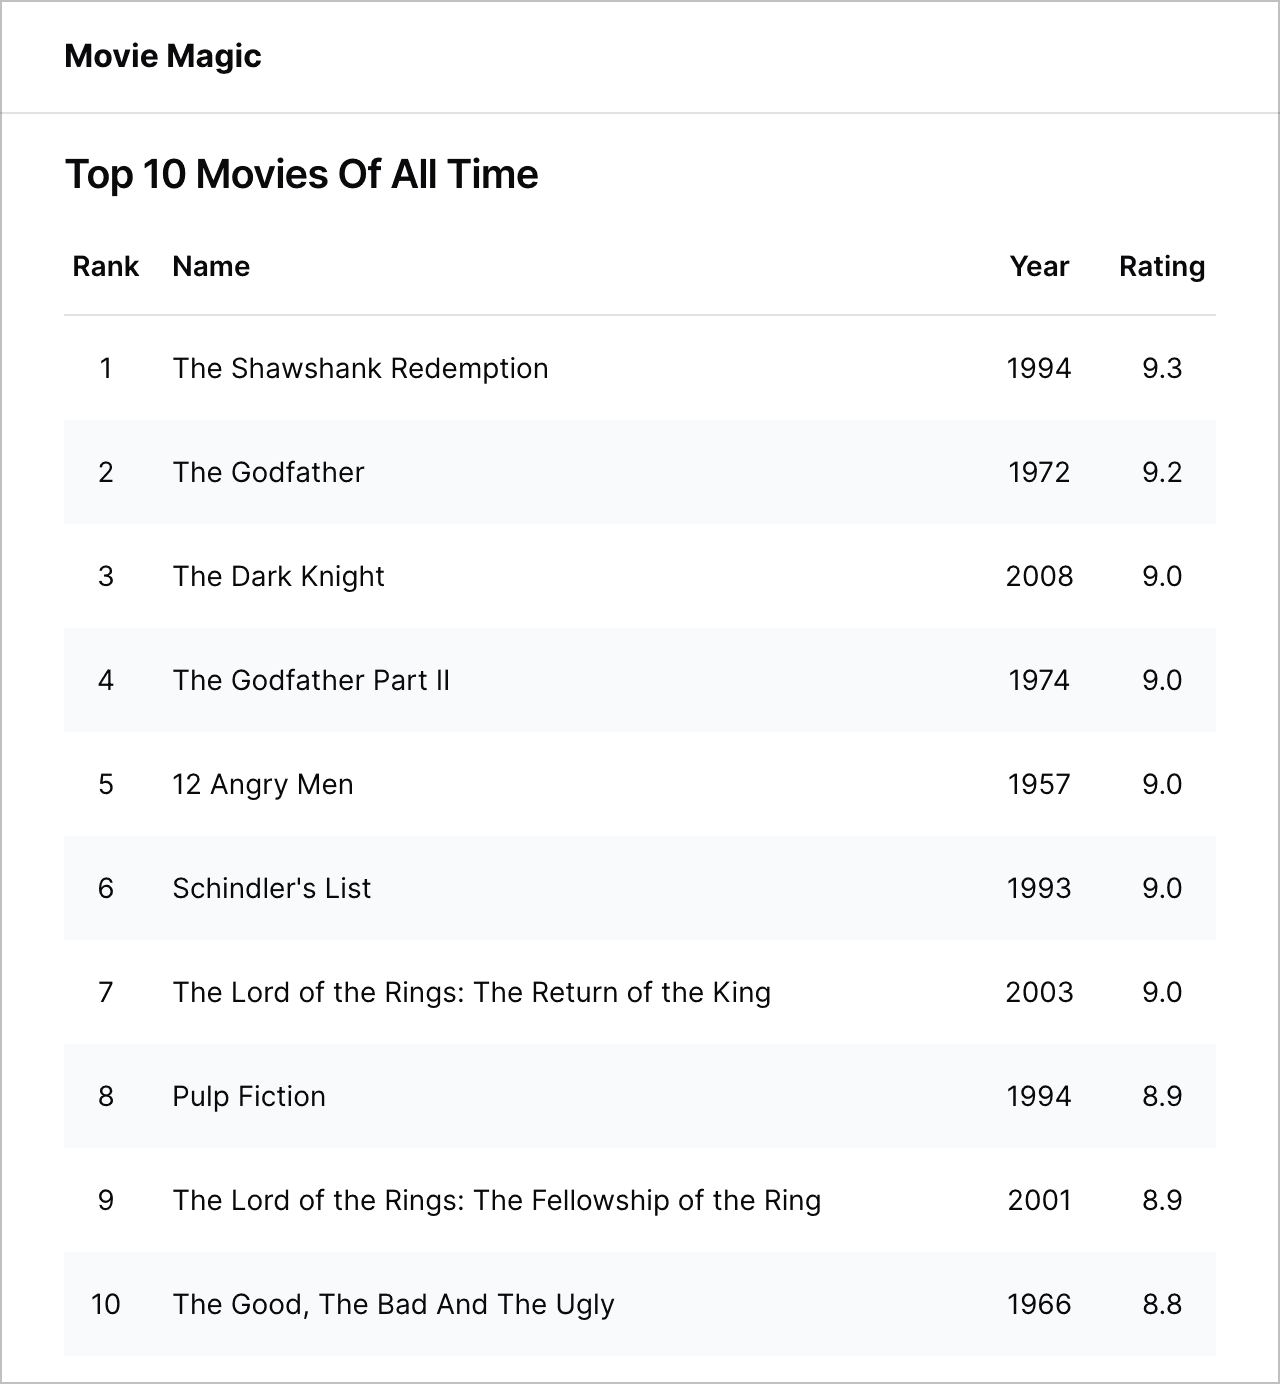 The Movie Magic app, showing the top 10 movies of all time in a list with the year released and the rating